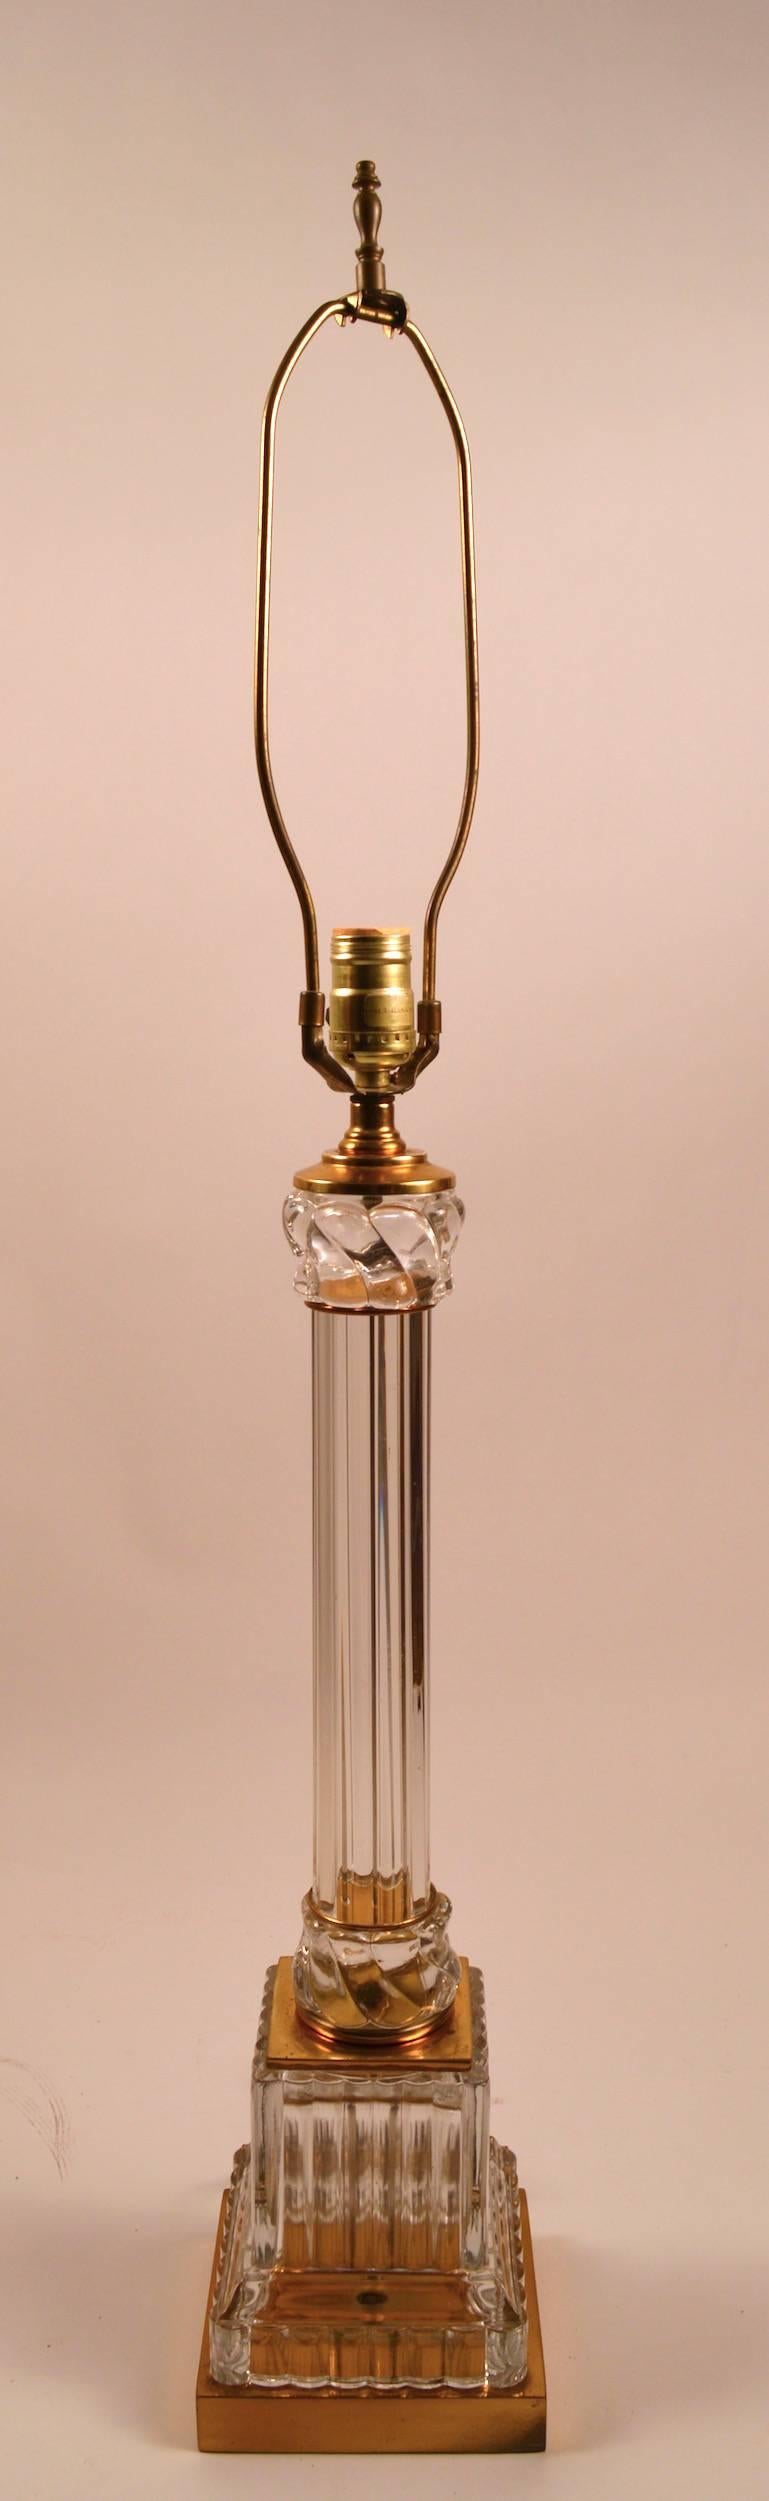 Cast glass and brass construction, classical style table lamp by Paul Hanson. Clean, original, working condition, shade not included. Height to top of socket 25.5